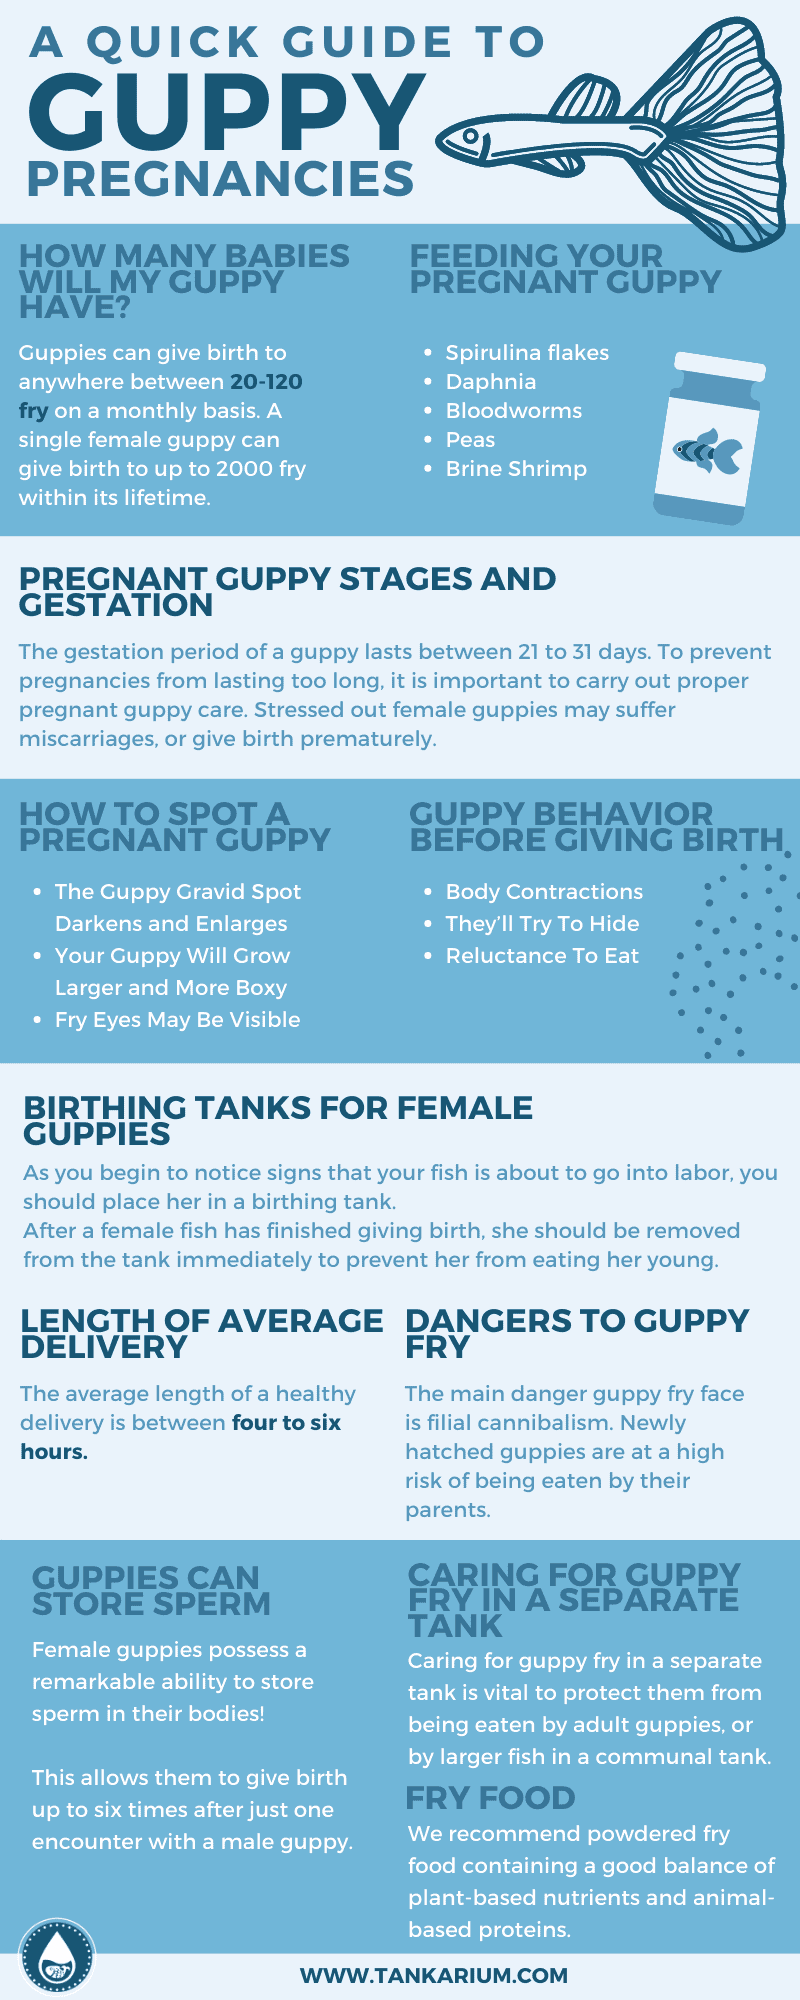 A quick guide to guppy pregnancies- infographics